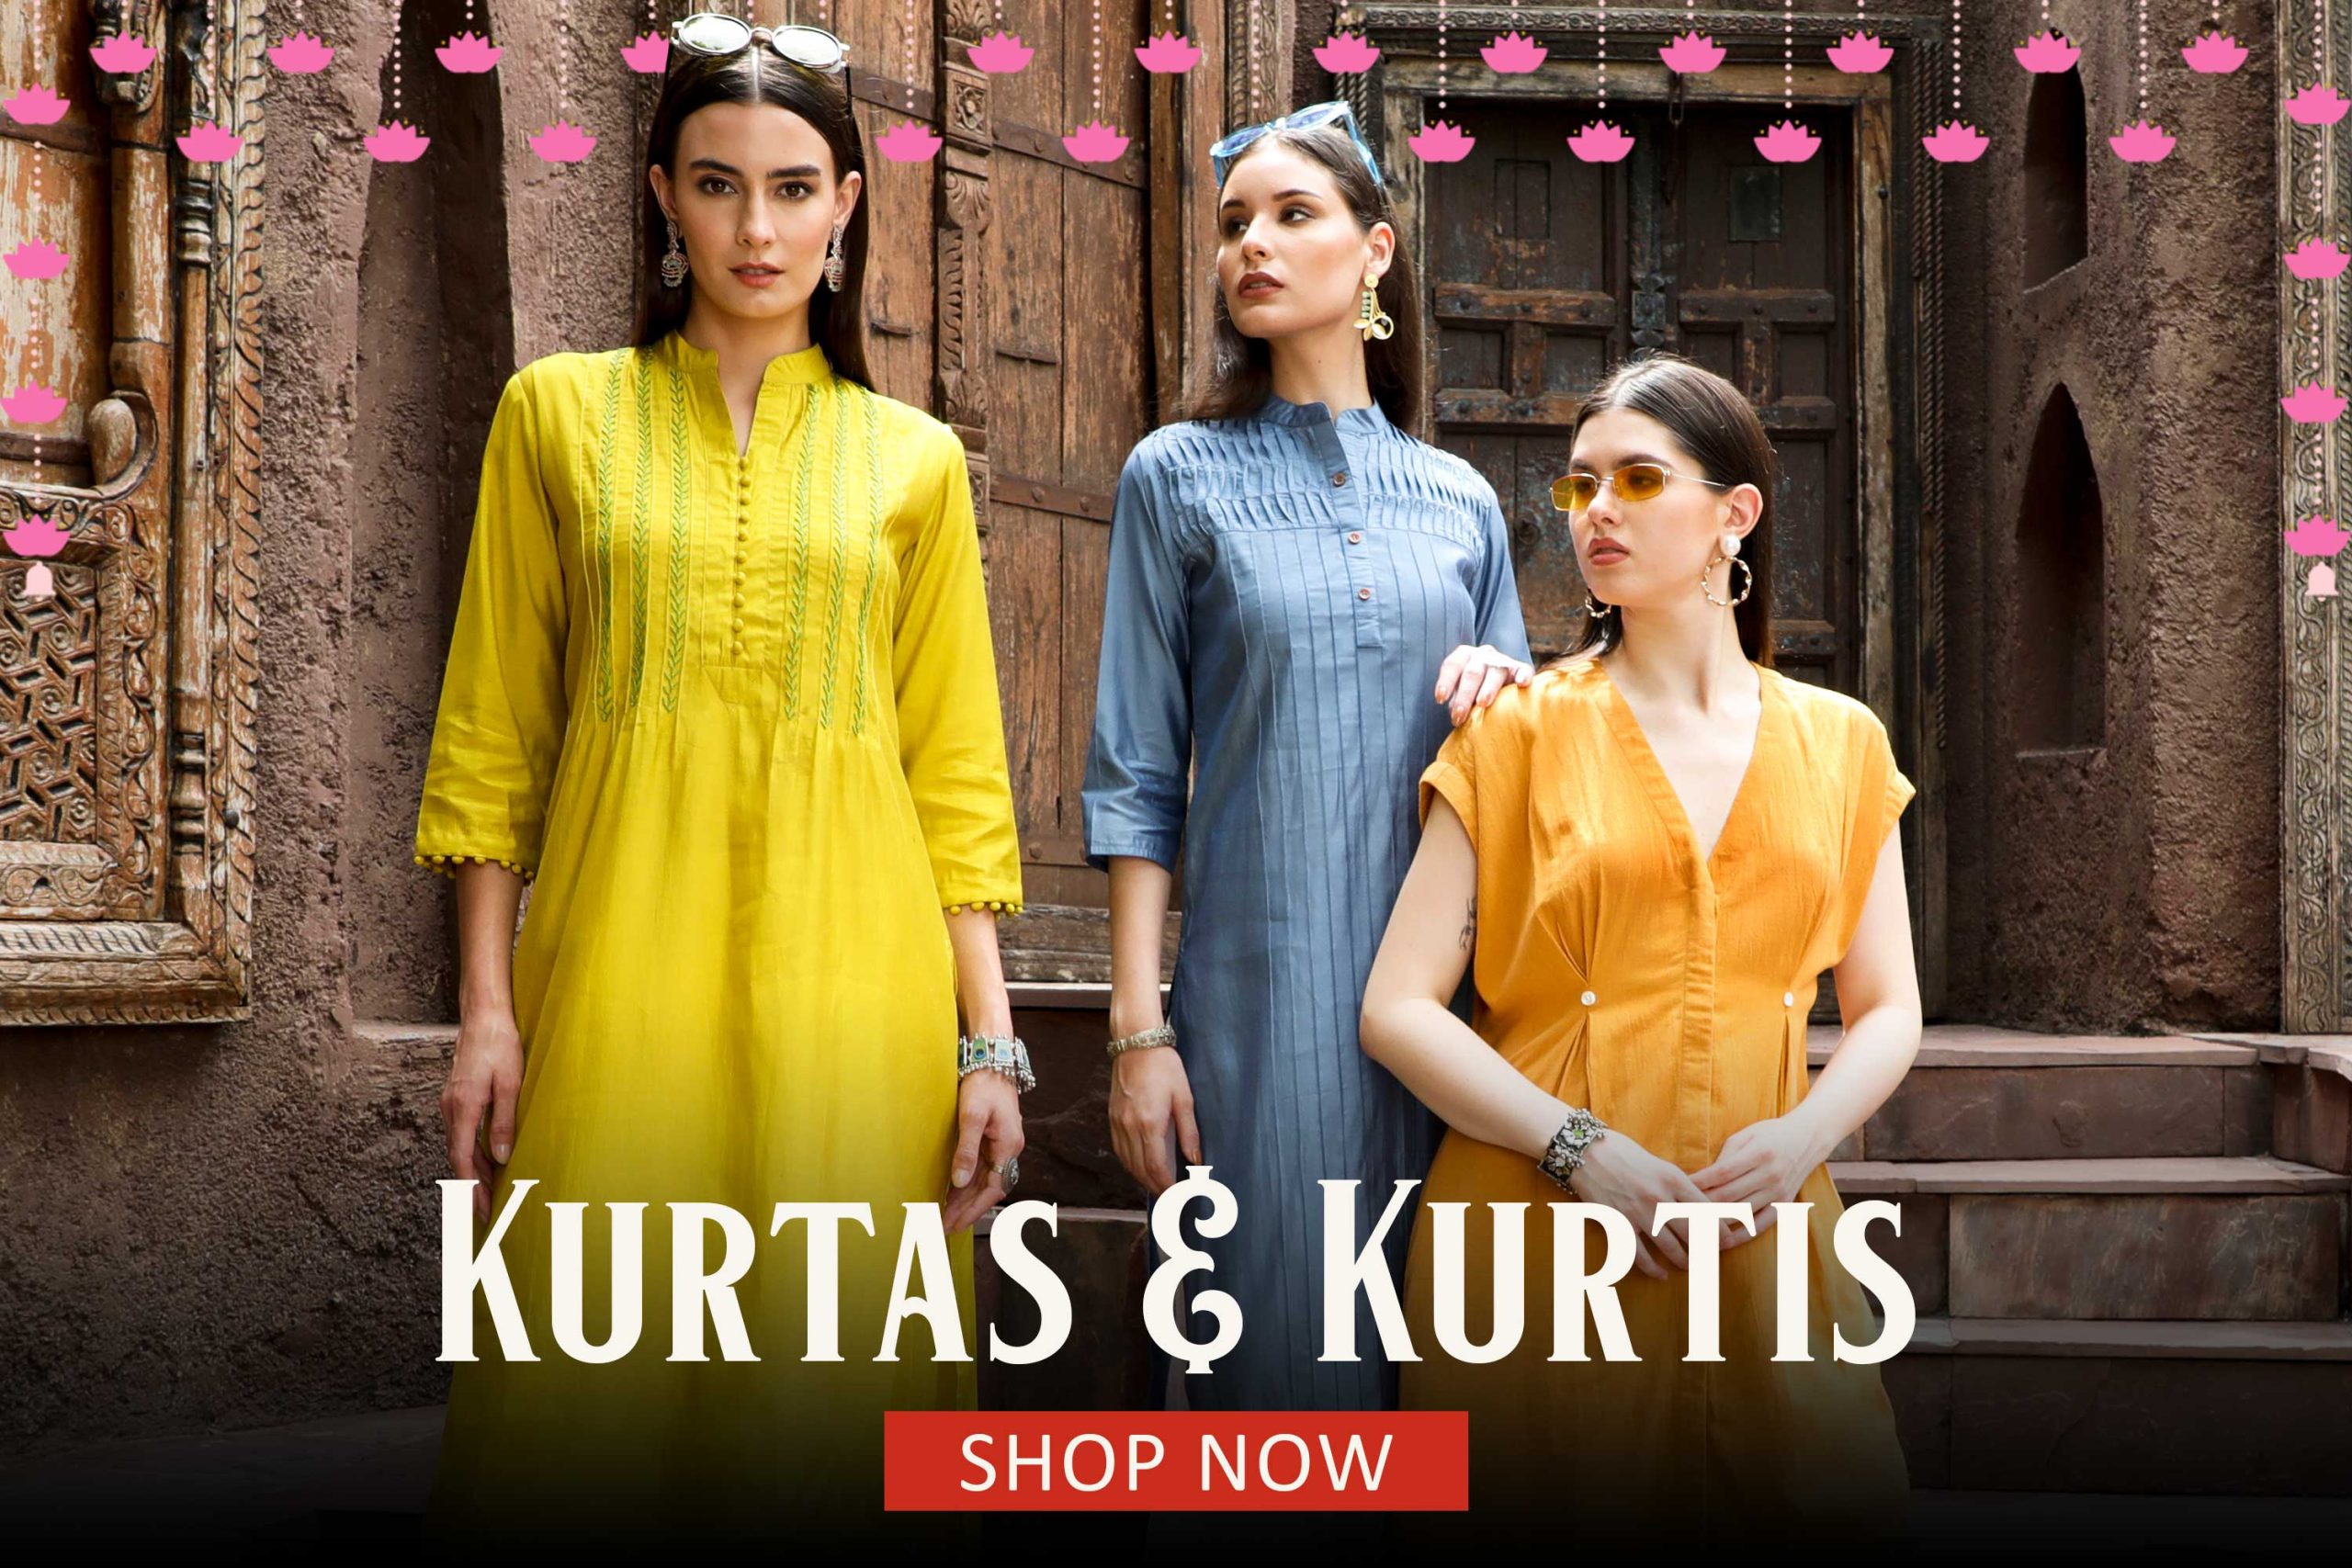 Which is the best shop for women Lahariya cotton kurti in Jaipur? - Quora